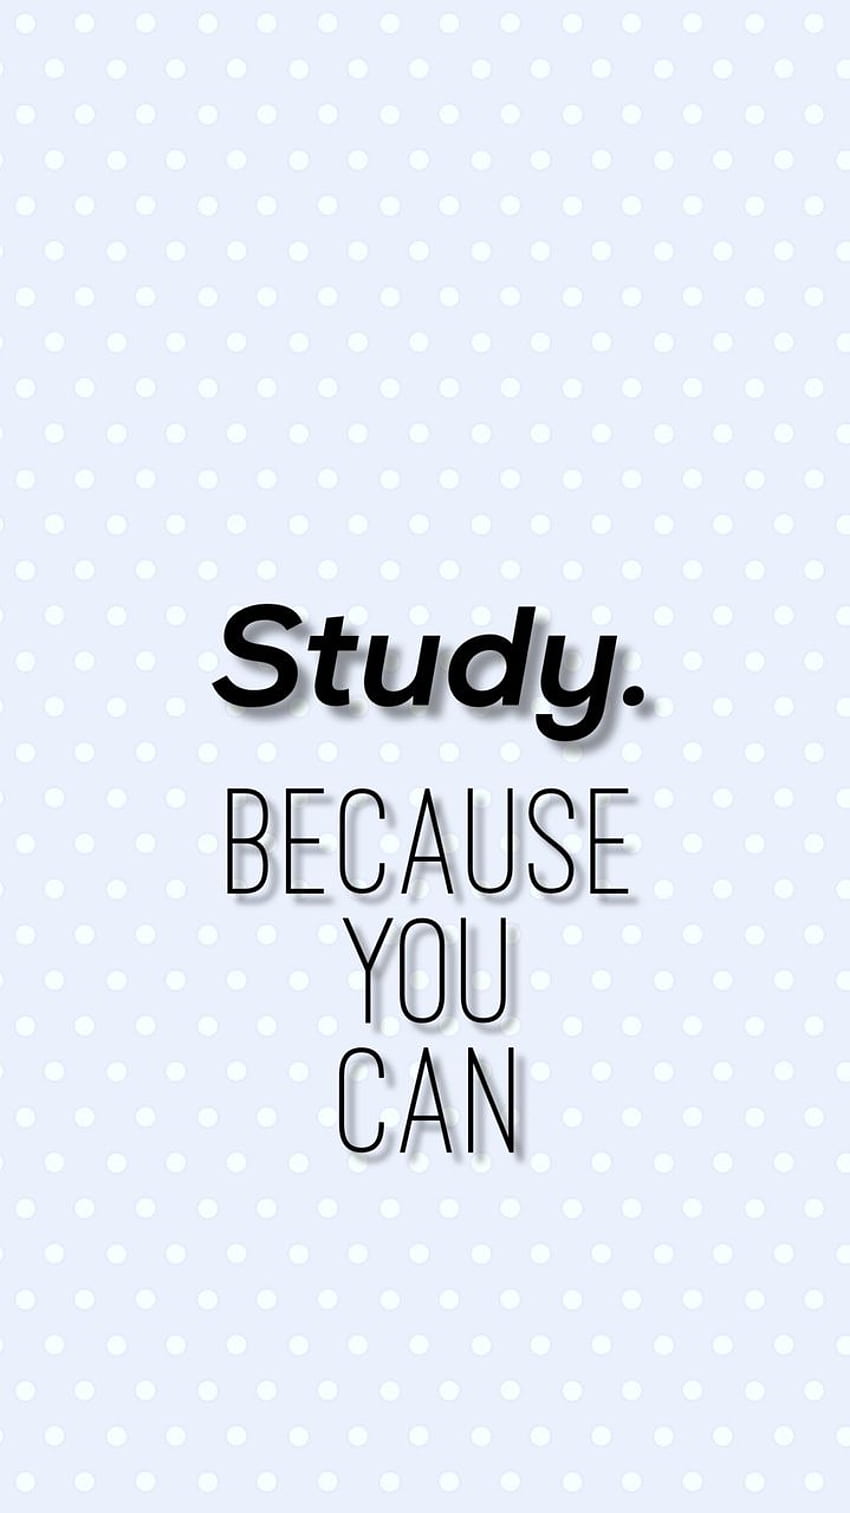 Study. Because You Can' Motivational 4 IPhone 7 8 Plus HD phone wallpaper